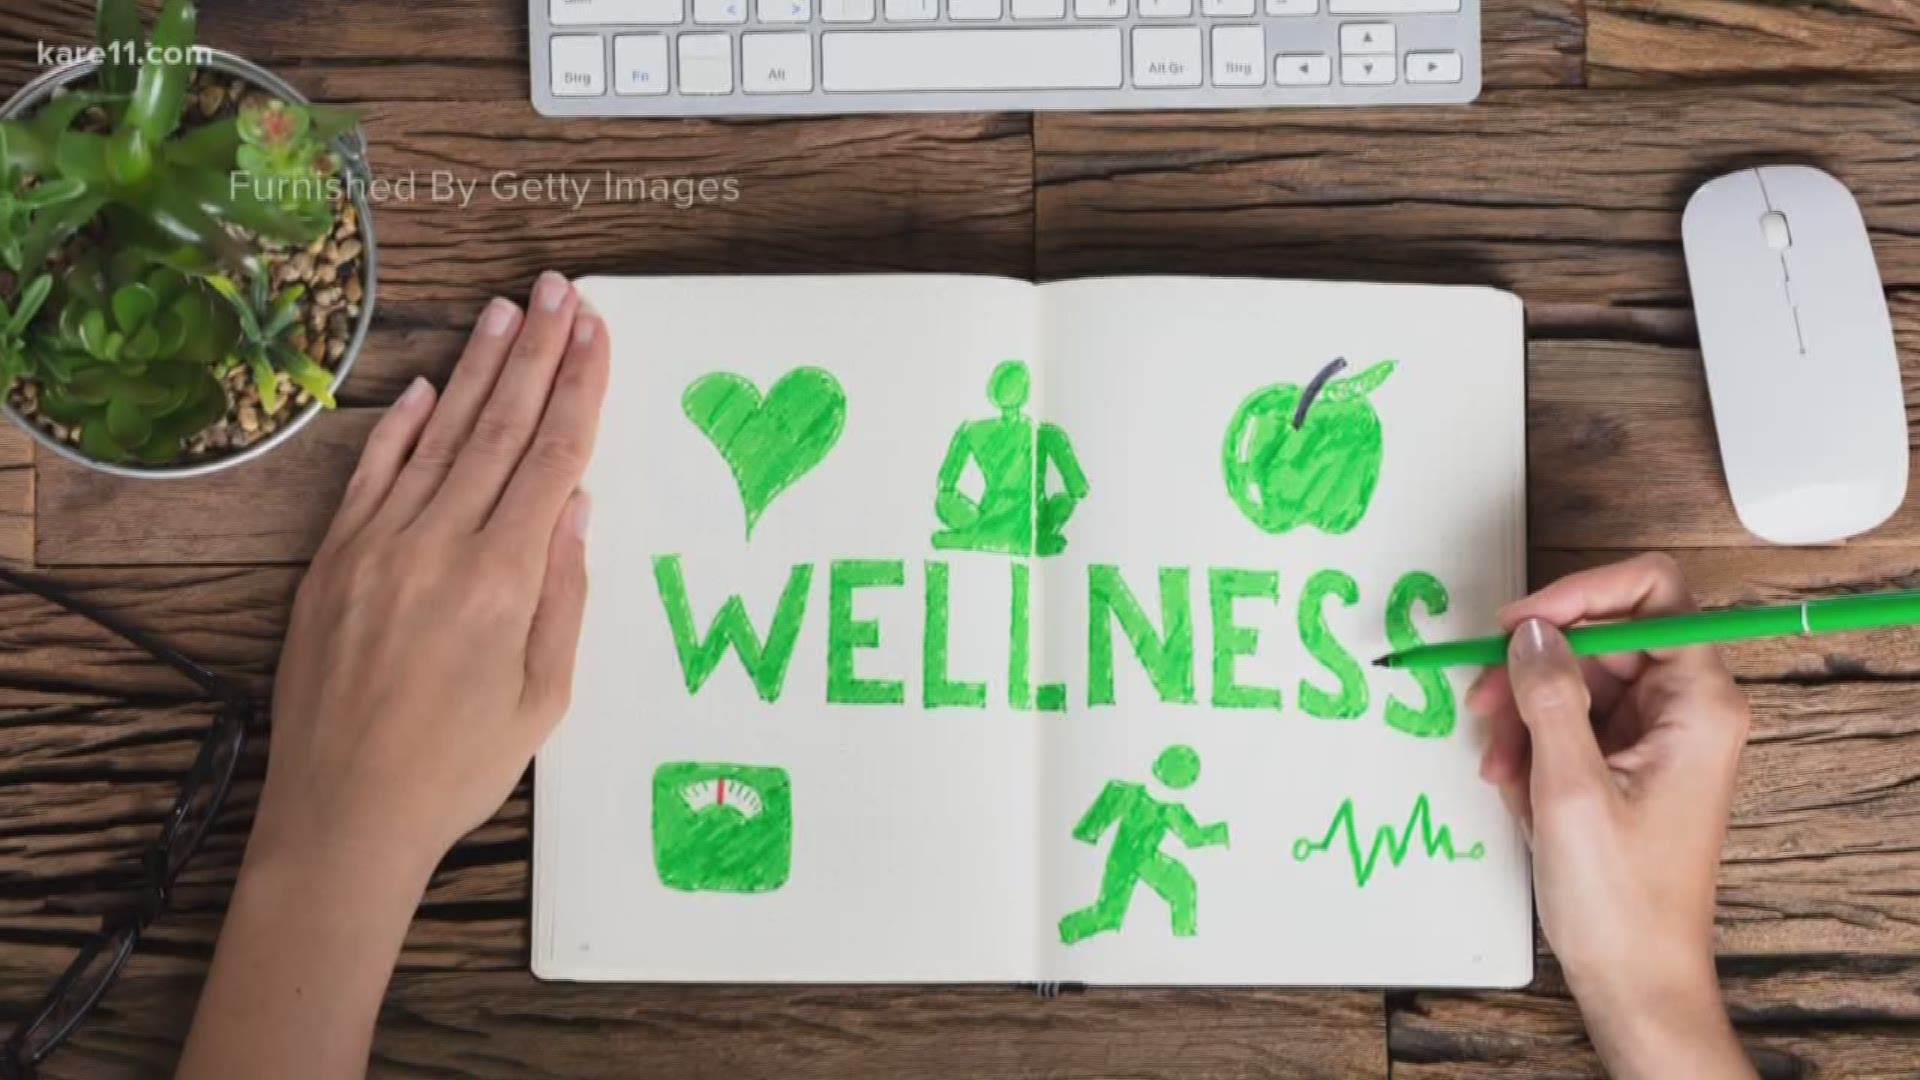 Until recently society looked upon mental health wellness and treatment as a luxury. But now we’re learning it’s a key component in establishing and maintaining a healthy lifestyle.